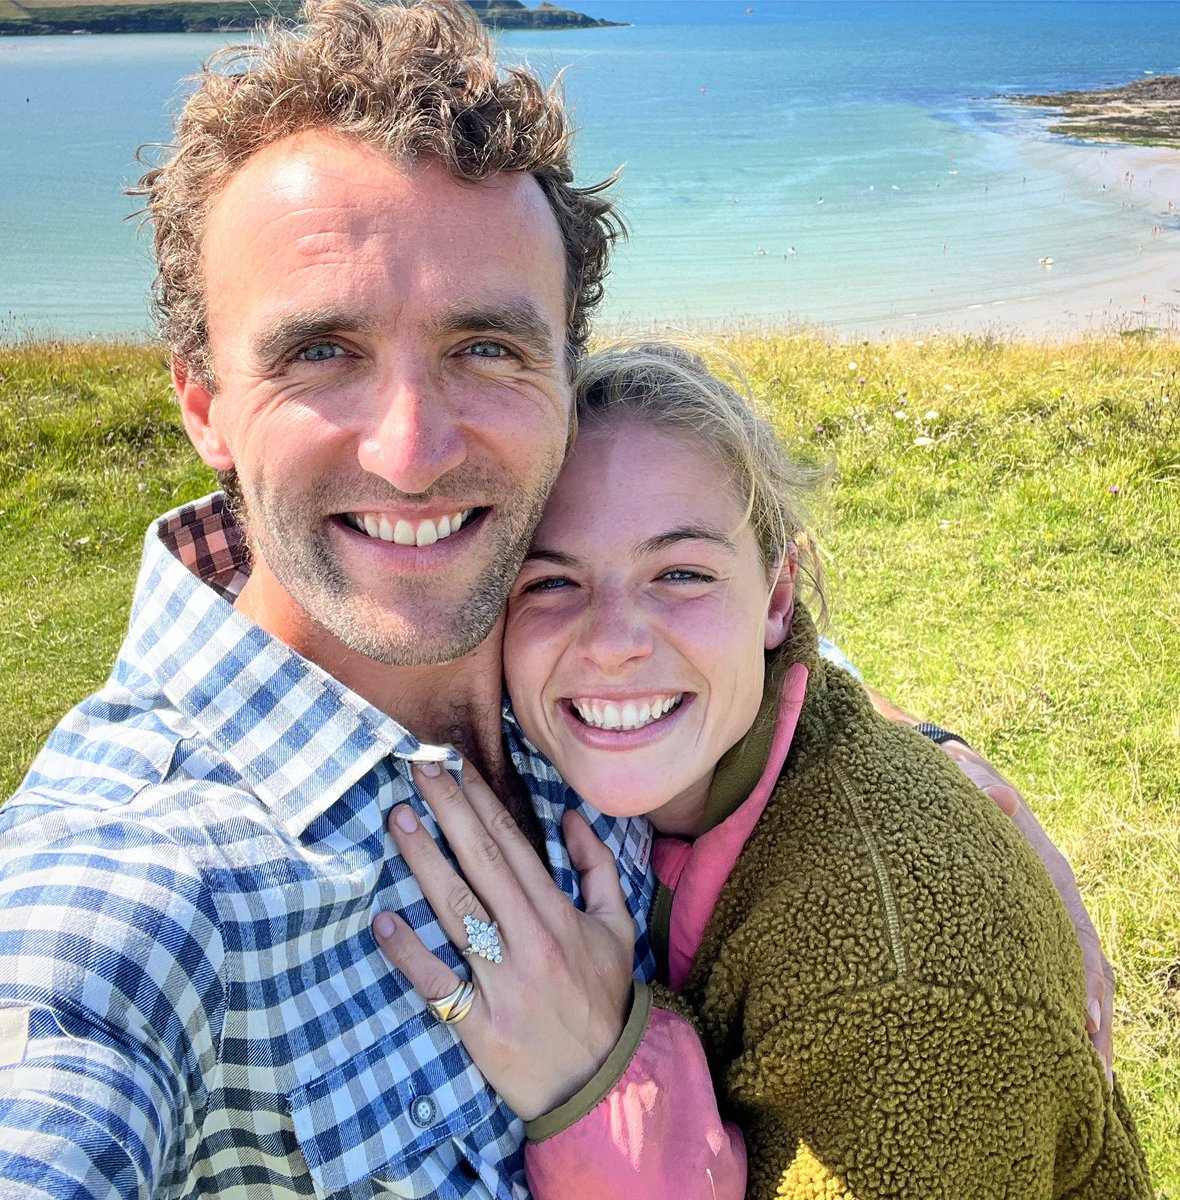 💍 25/07/23 💍 The happiest day of my life! My bestest friend in the world asked me to marry him, and of course (through so many happy tears) I said YES!!! 🥰 Feeling like the luckiest girl in the world!! Bring on the rest of our lives!!! #engaged #marriage #engagement